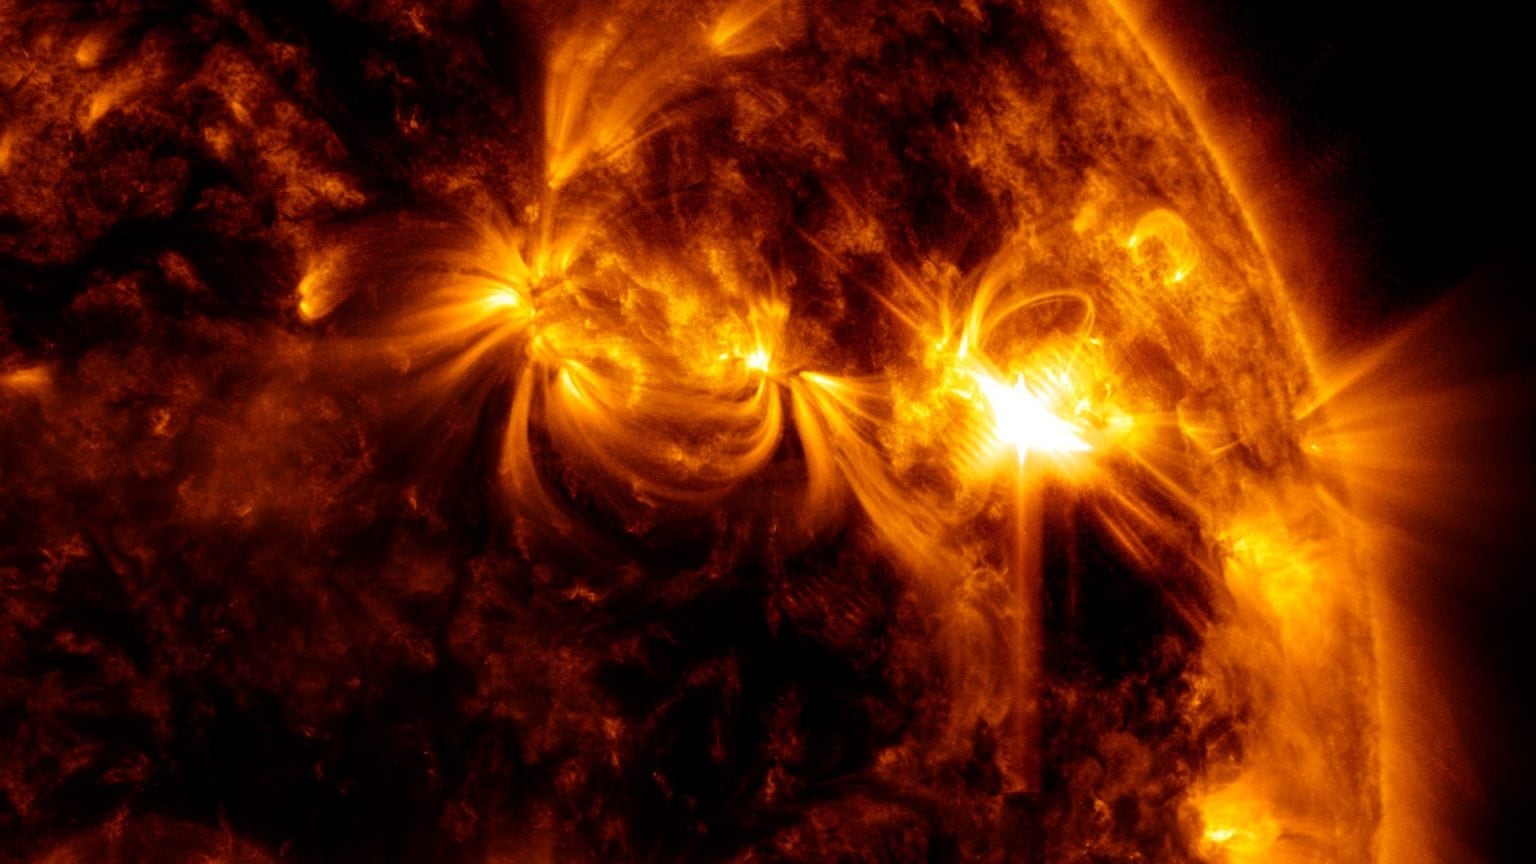 storm coming? Check what NASA has revealed about this CME Photos